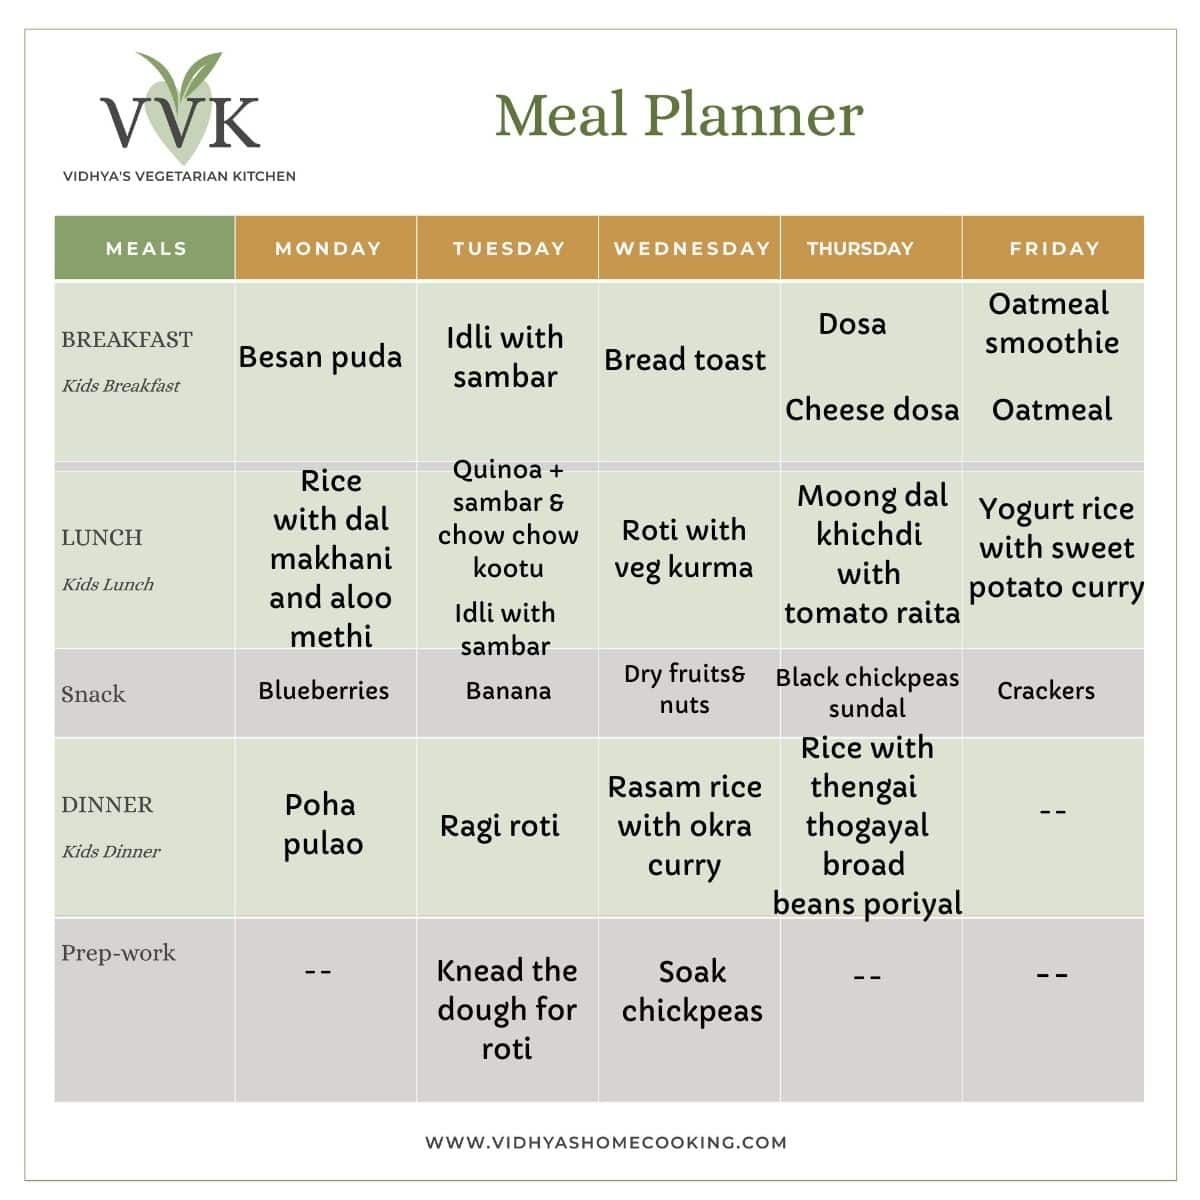 Indian Meal Plan | Weekly Meal Planner - Vidhya’s Vegetarian Kitchen